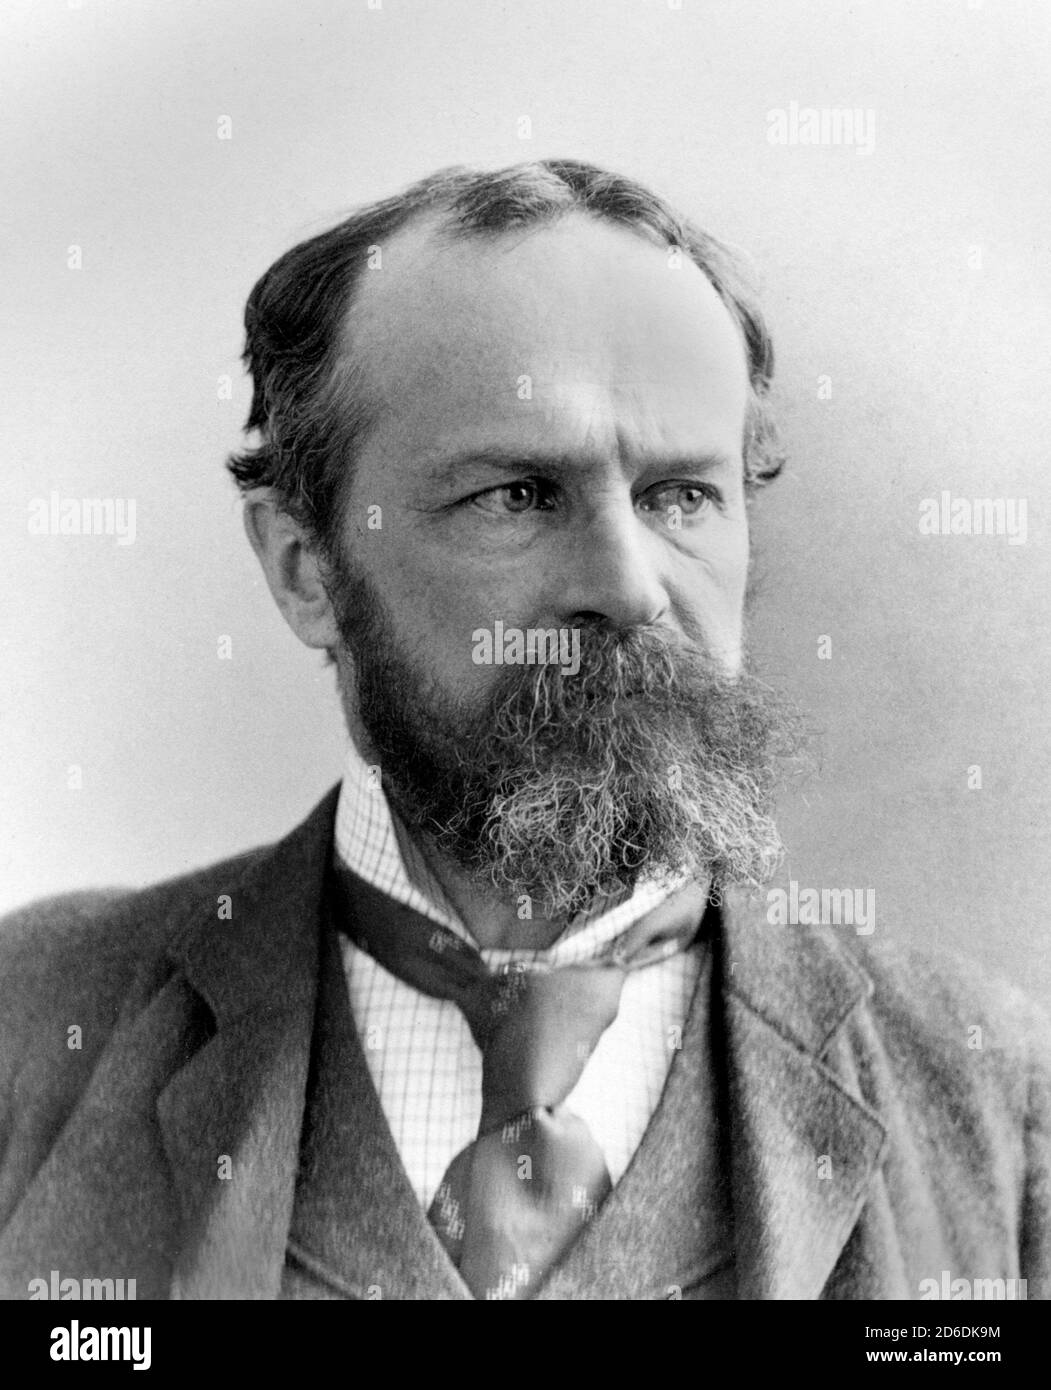 Willliam James. Portrait of the American philosopher and psychologist, William James (1842-1910) by Pach Brothers Studio, c.1880 Stock Photo